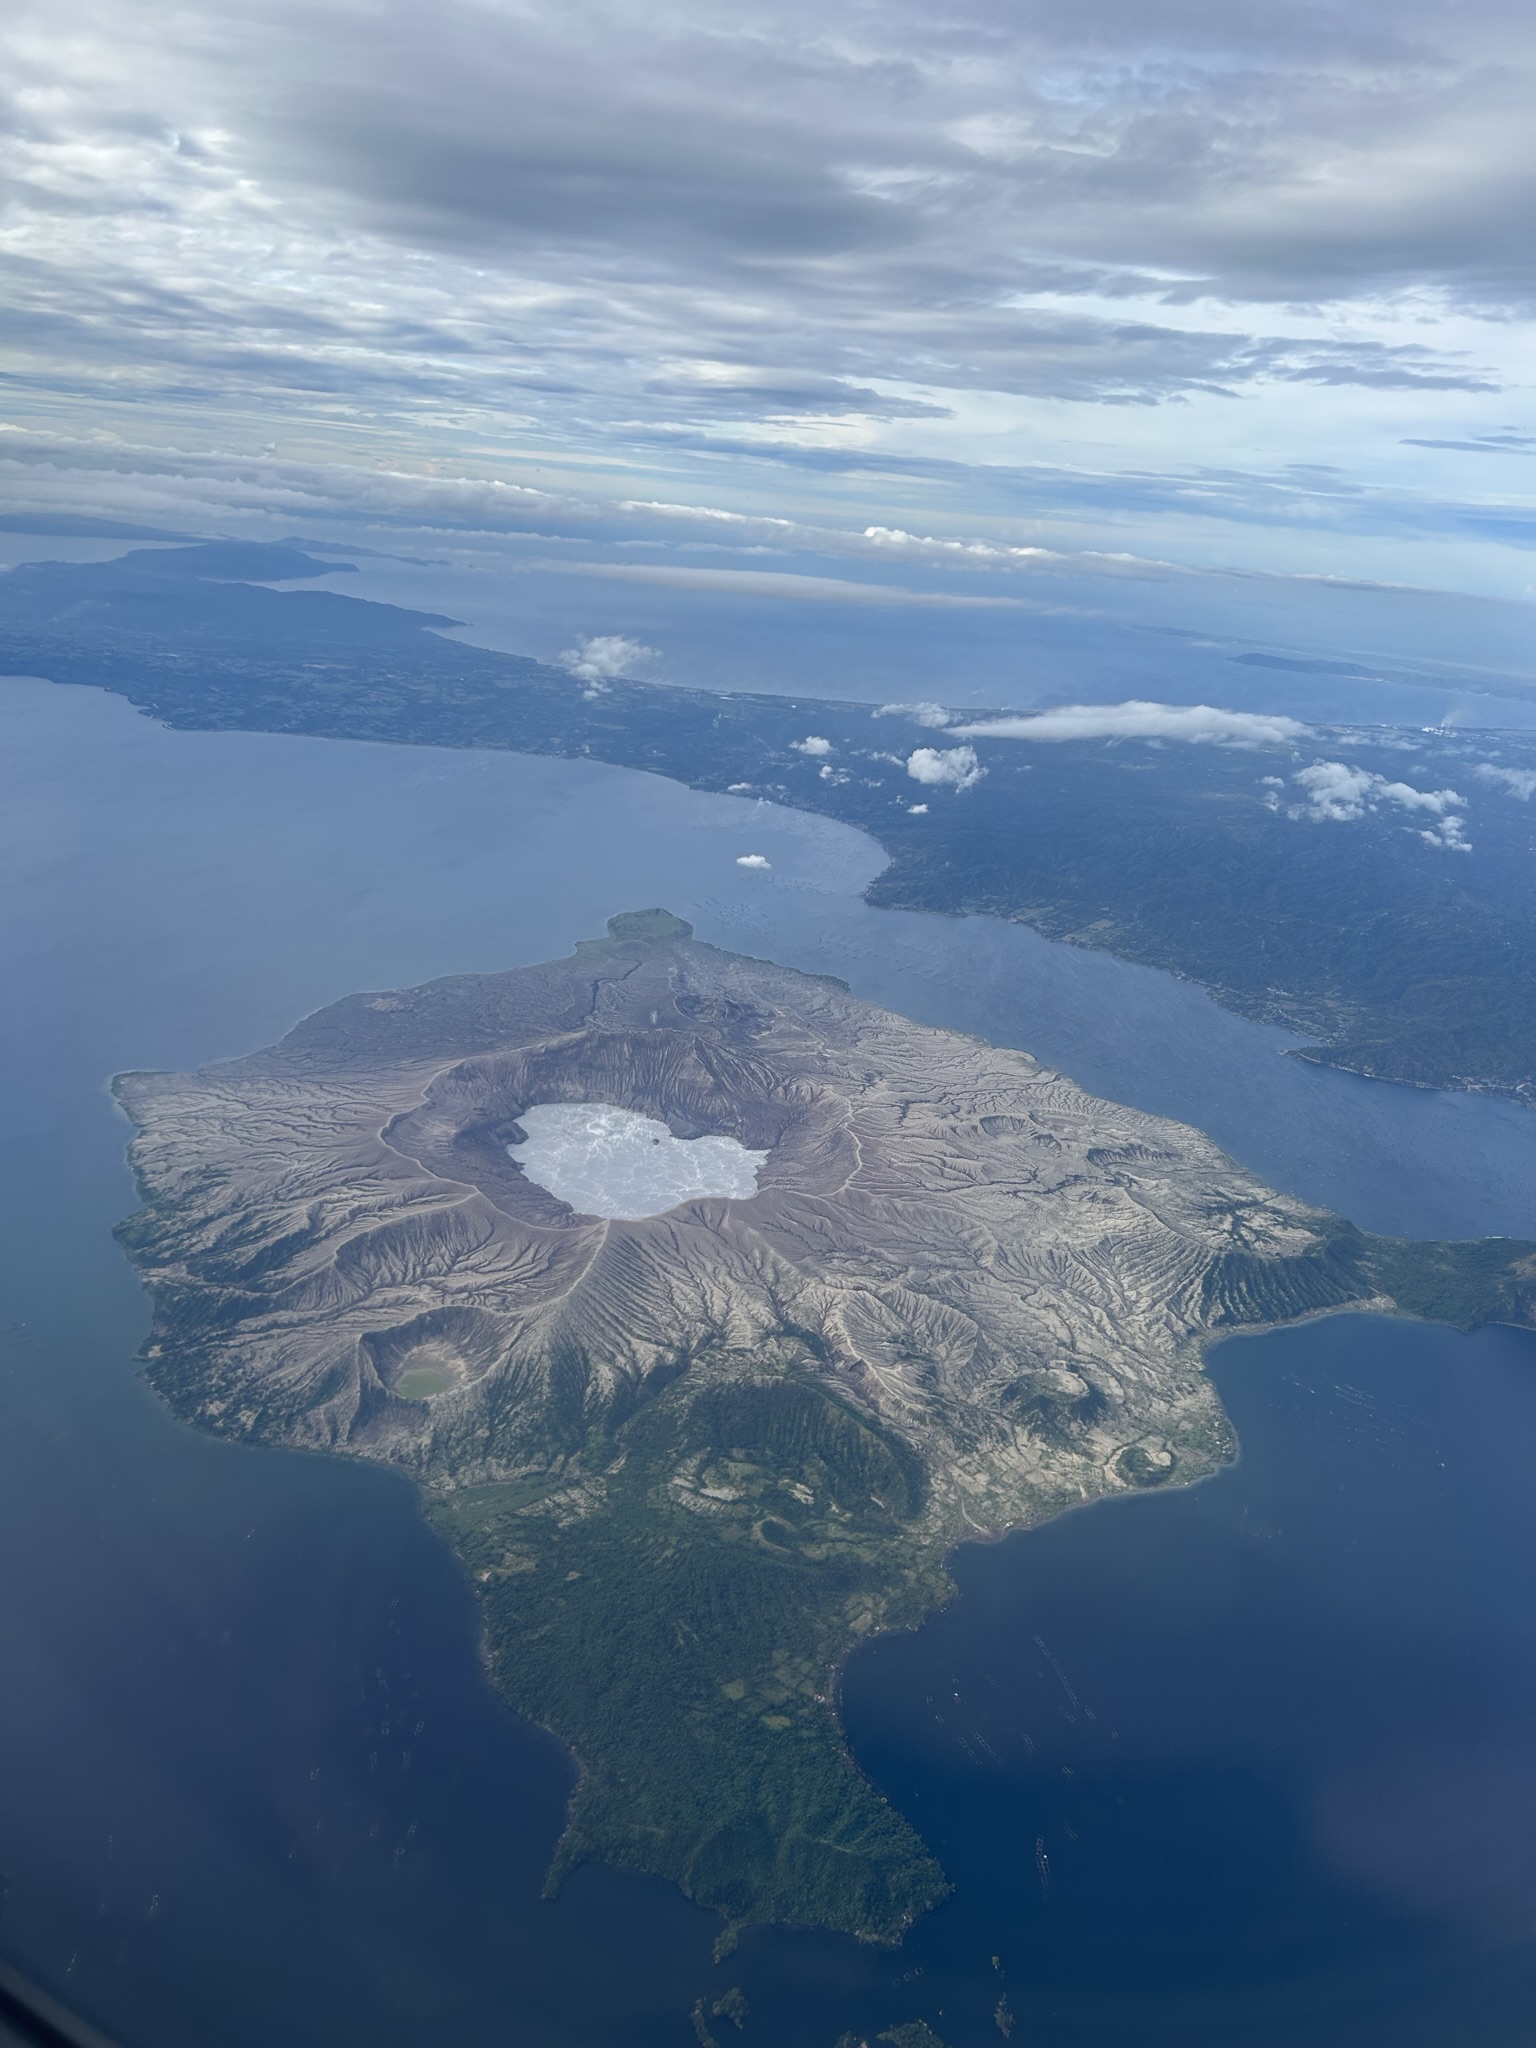 Picture of the taal volcano through the window in an airplane.